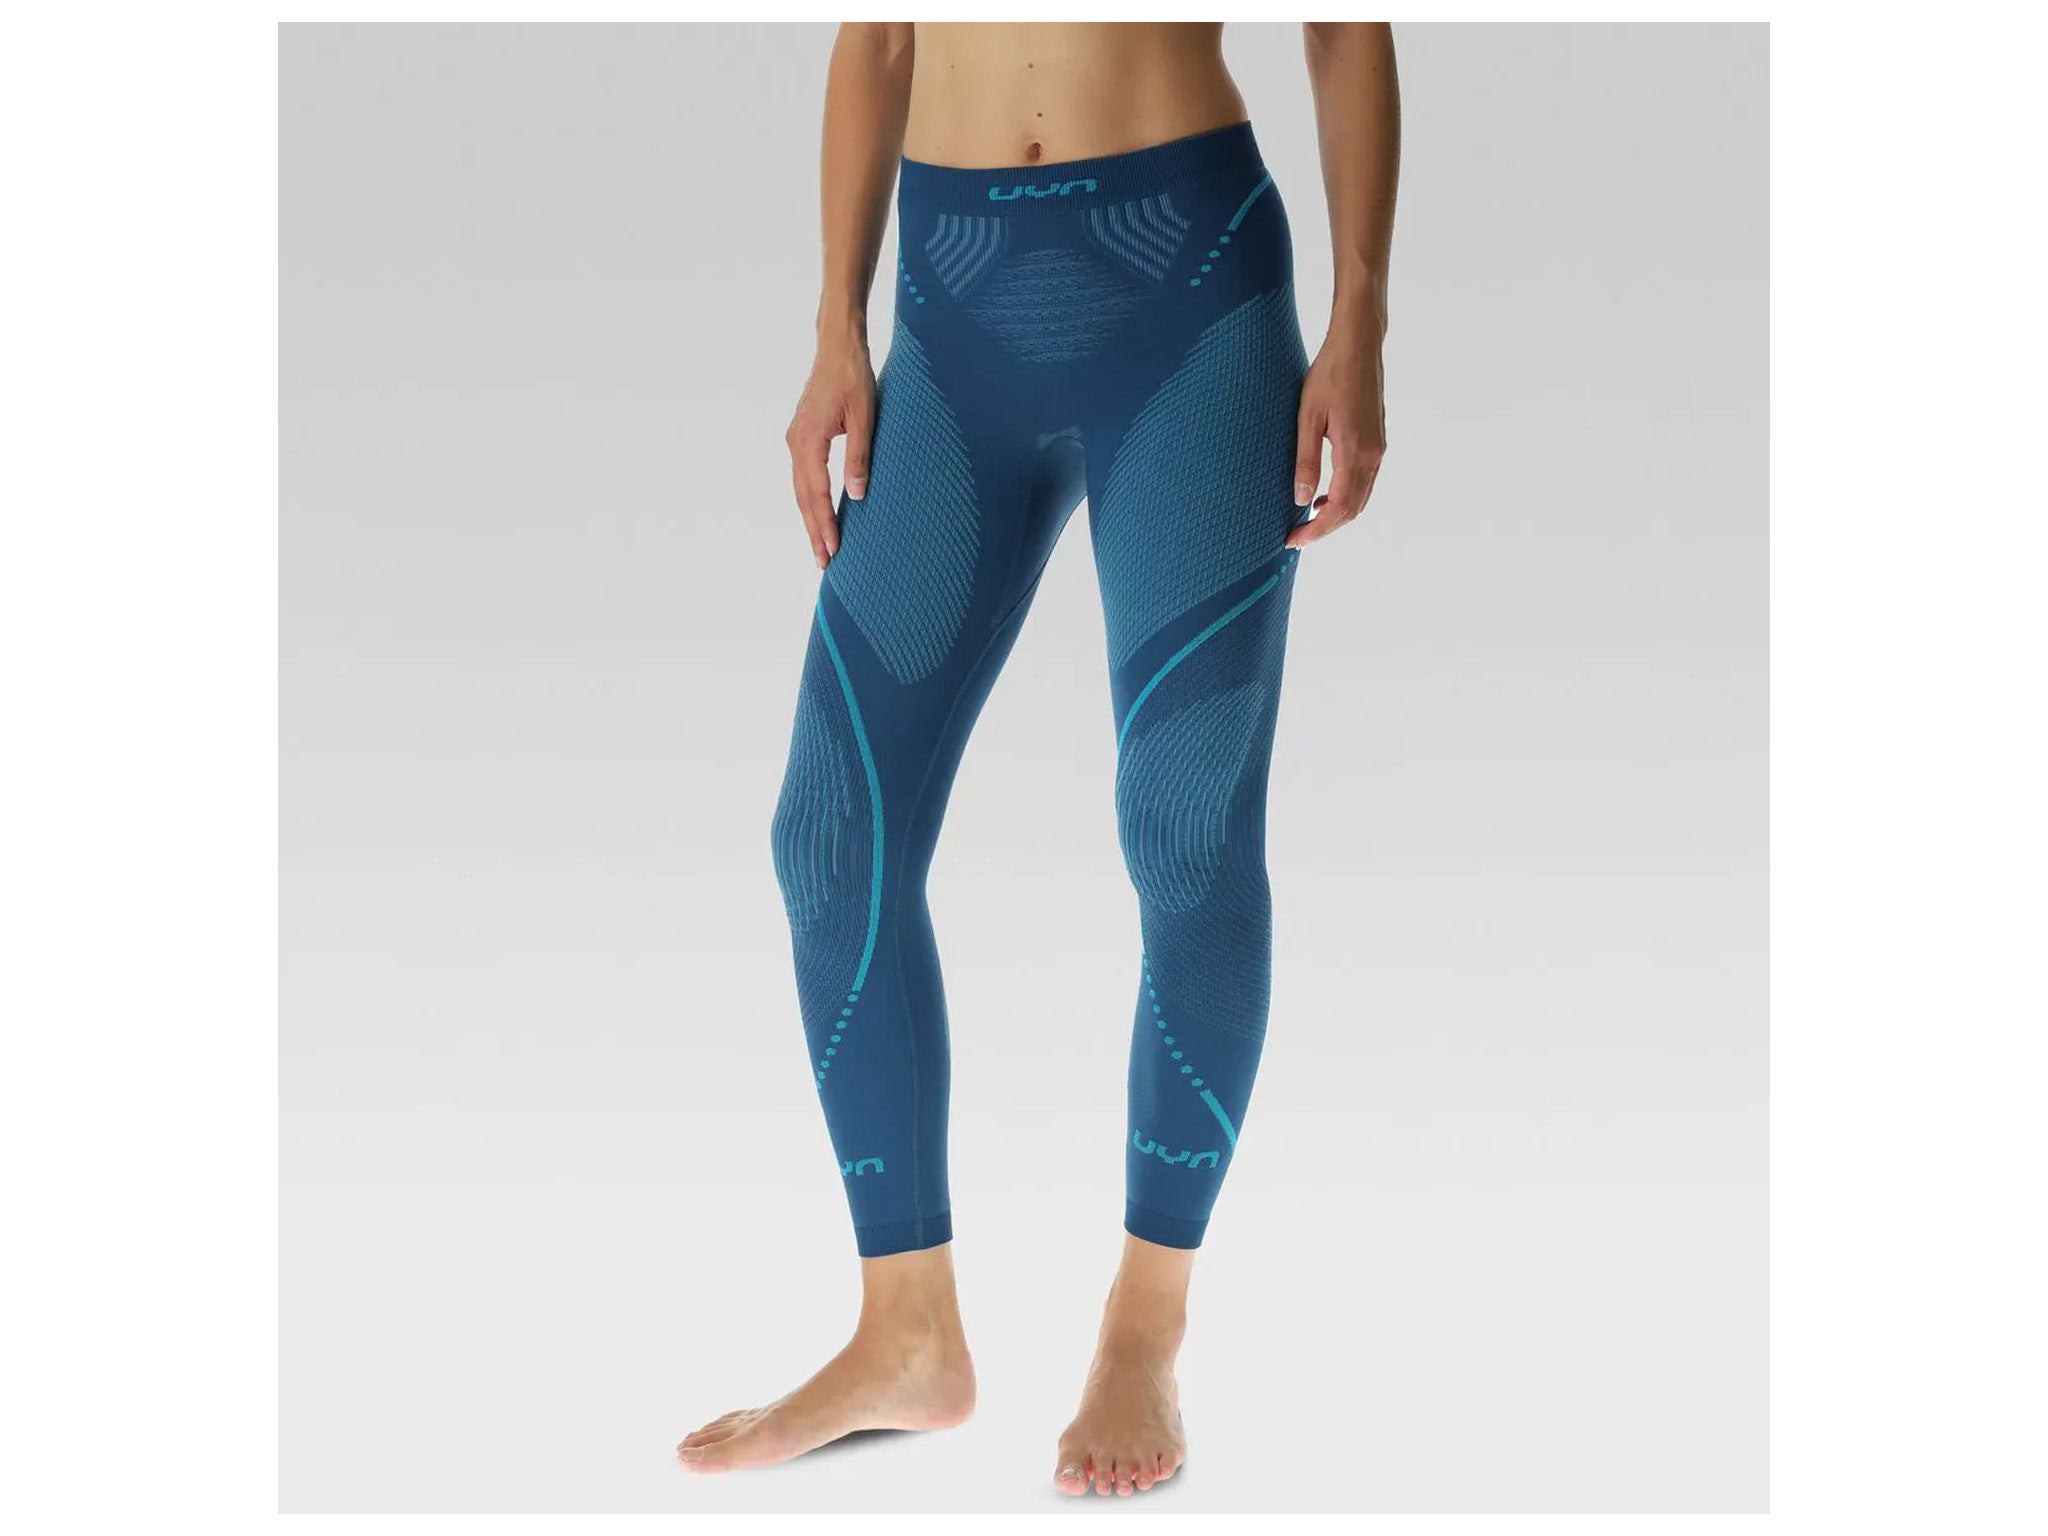 UYN-long-underwear-Indybest-review